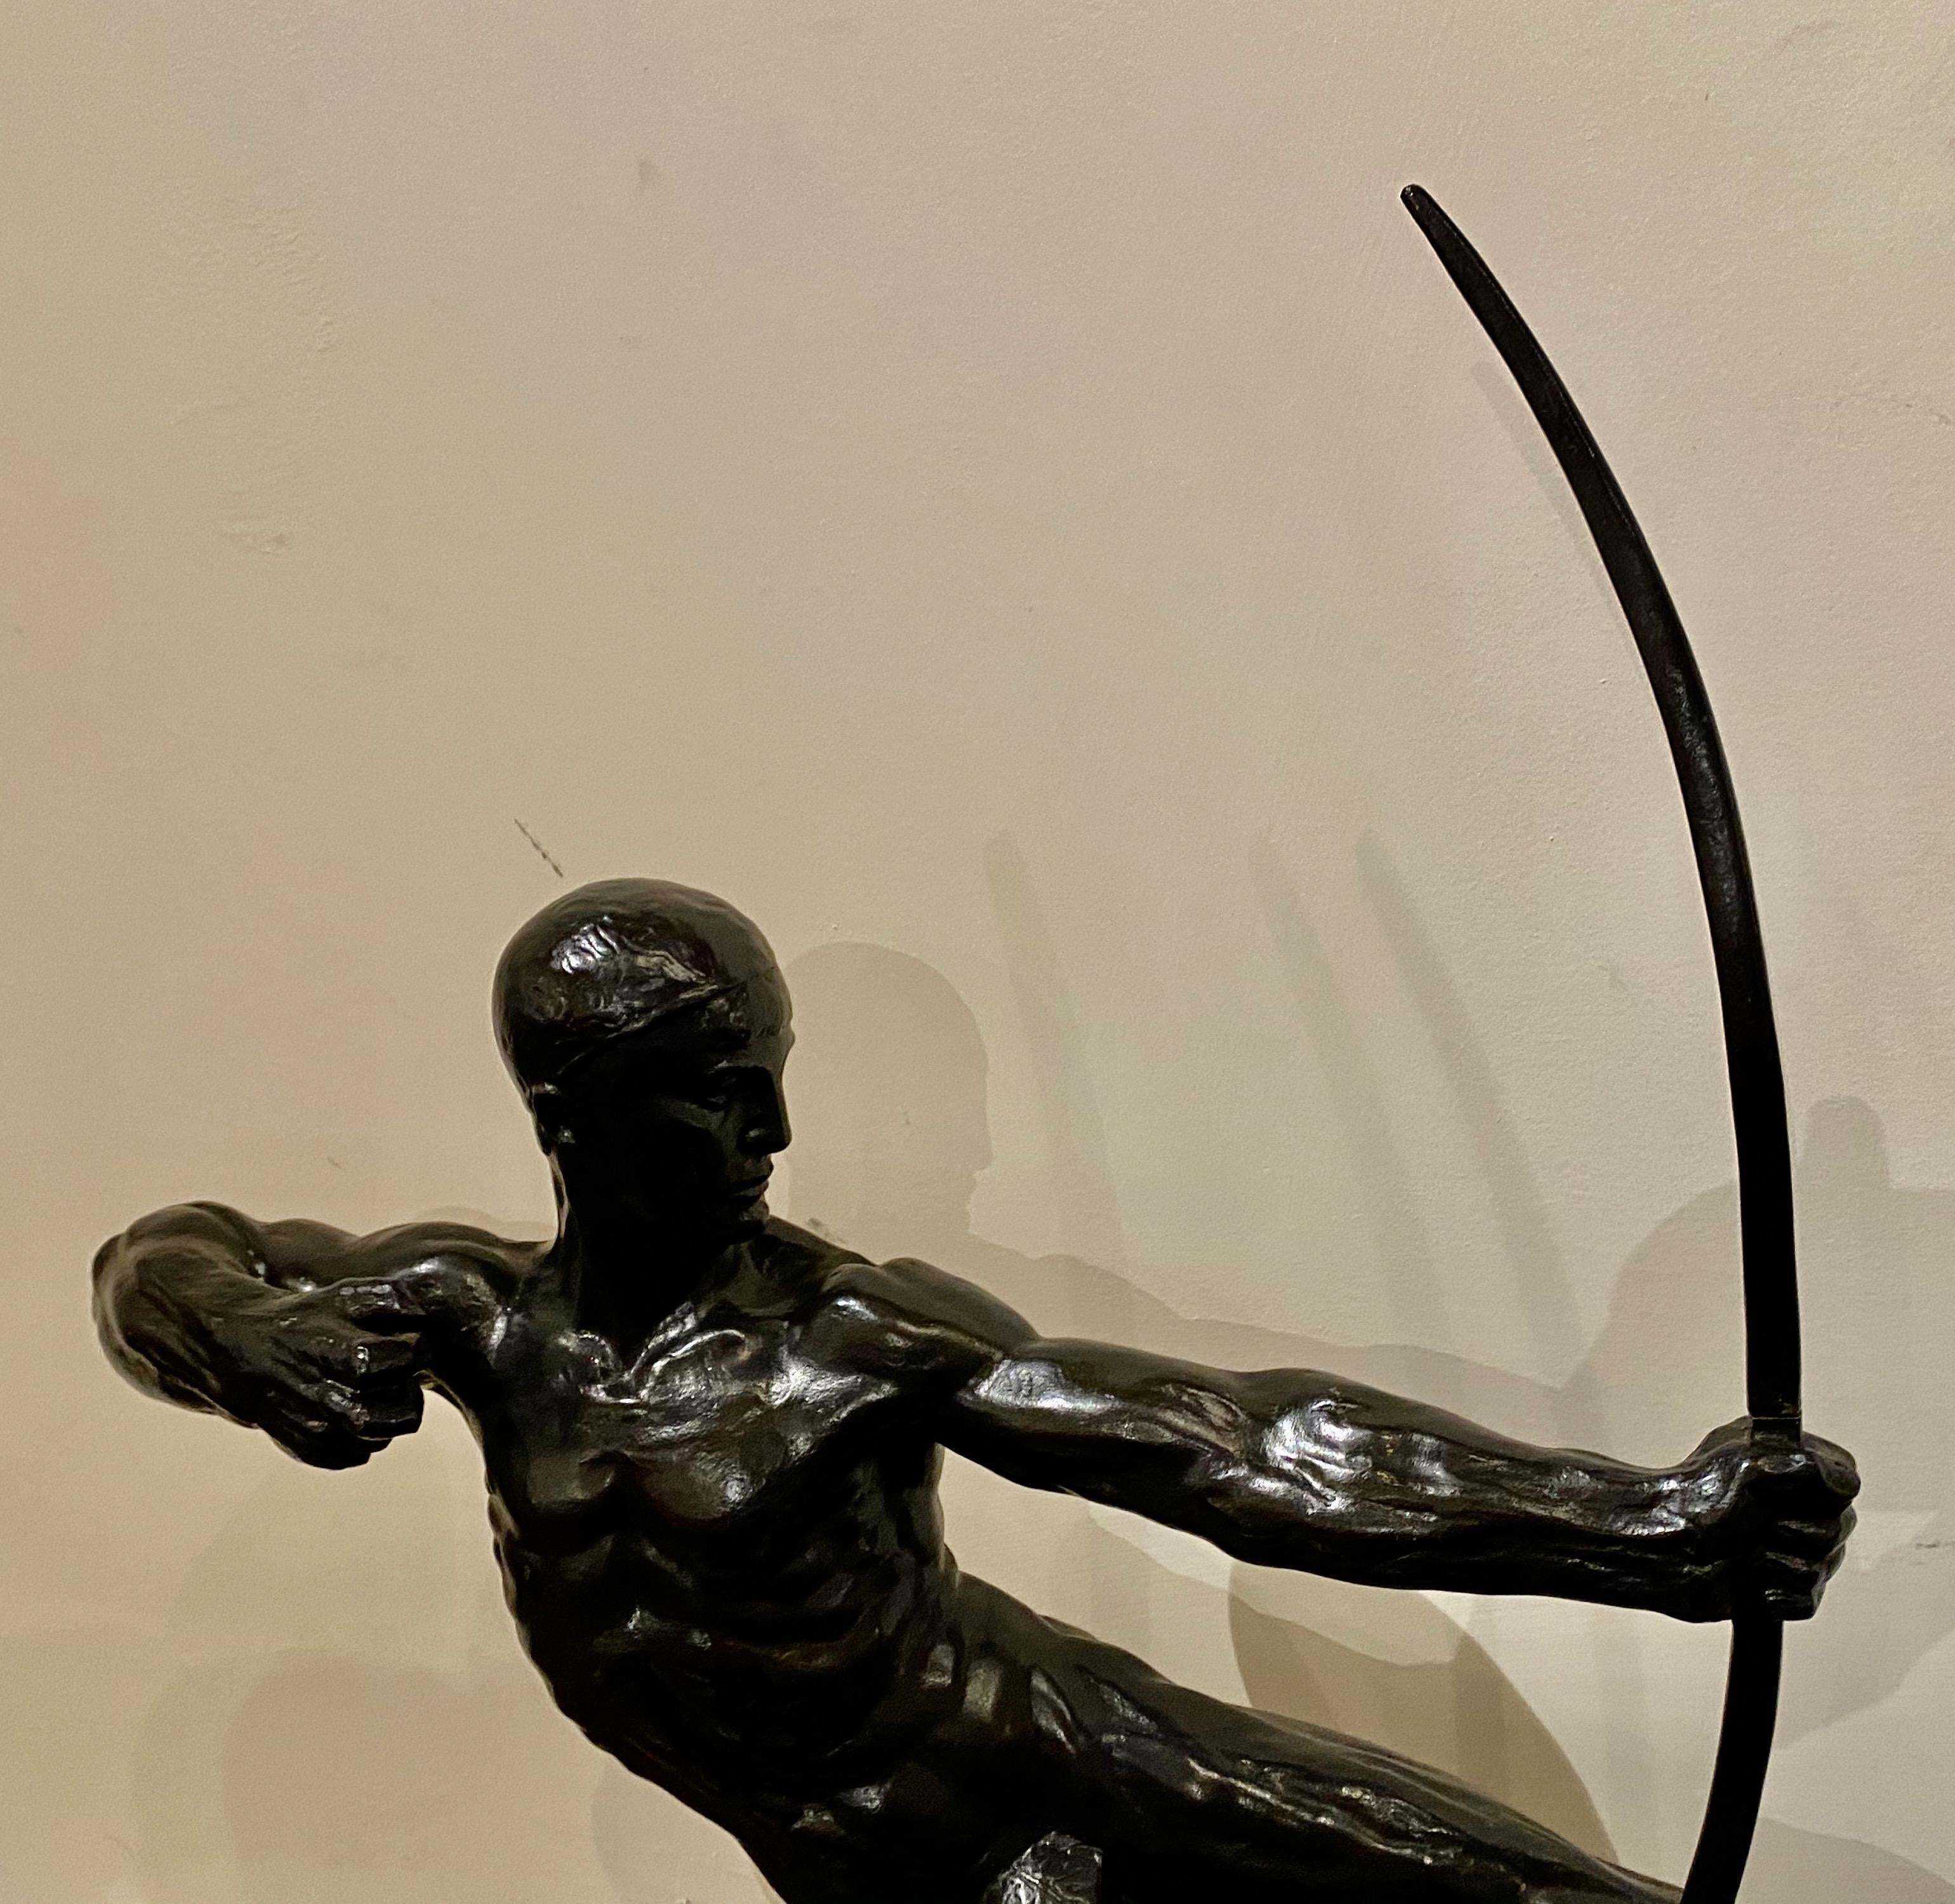 Art Deco bronze sculpture male nude archer ‘Hercules’ by Victor Demanet 1925. Superior quality bronze with wonderful dark black patina. A dynamic male figure representing strength and power. The title of this work is’ Hercules’ signed by Victor